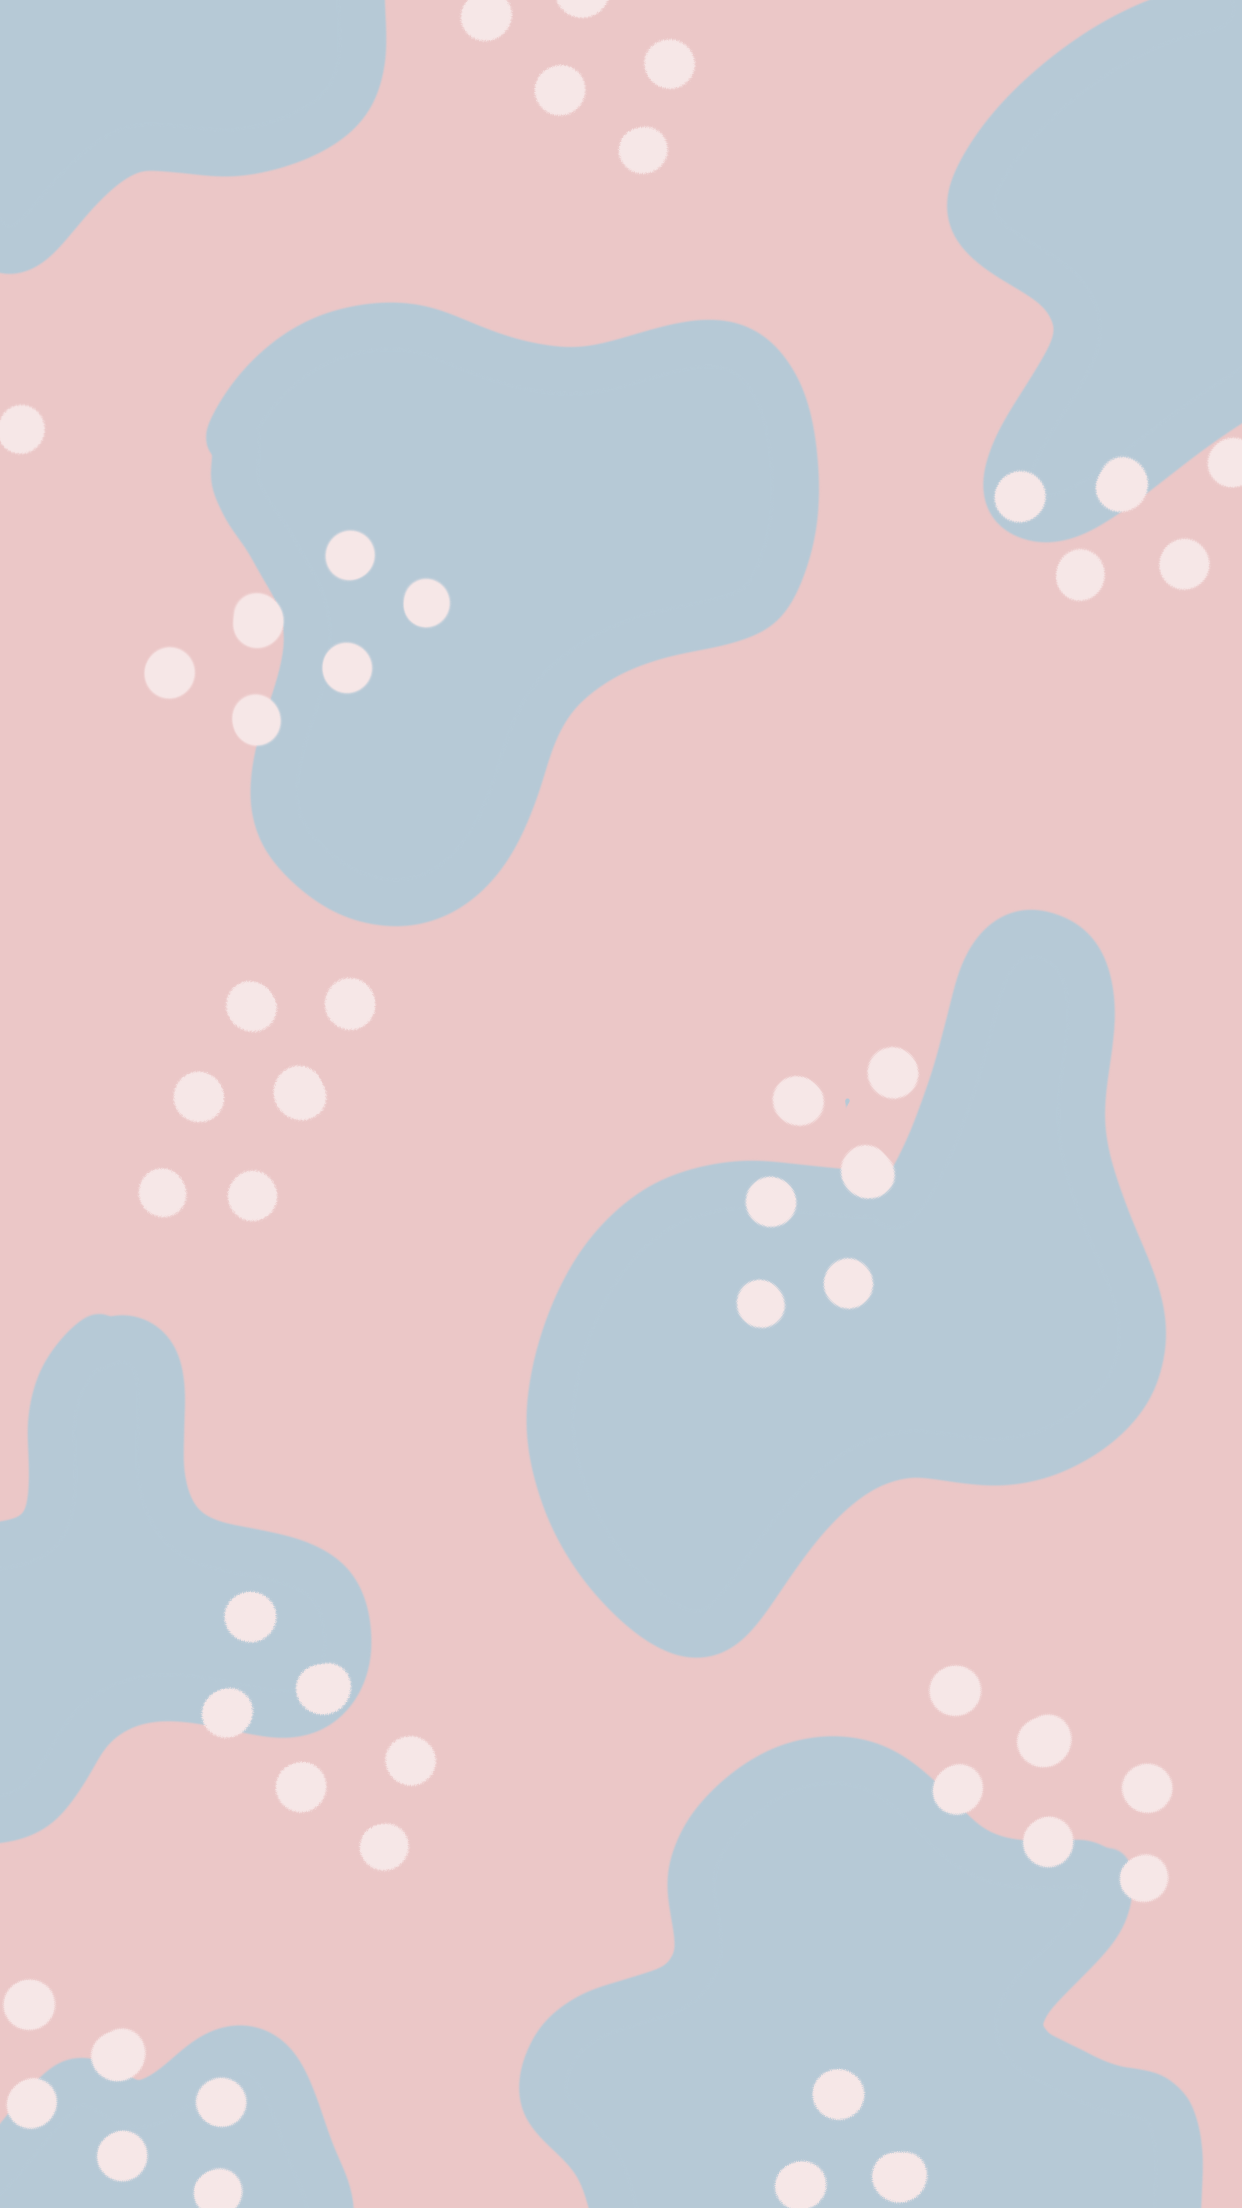 A blue and pink pattern with white dots - Candy, pattern